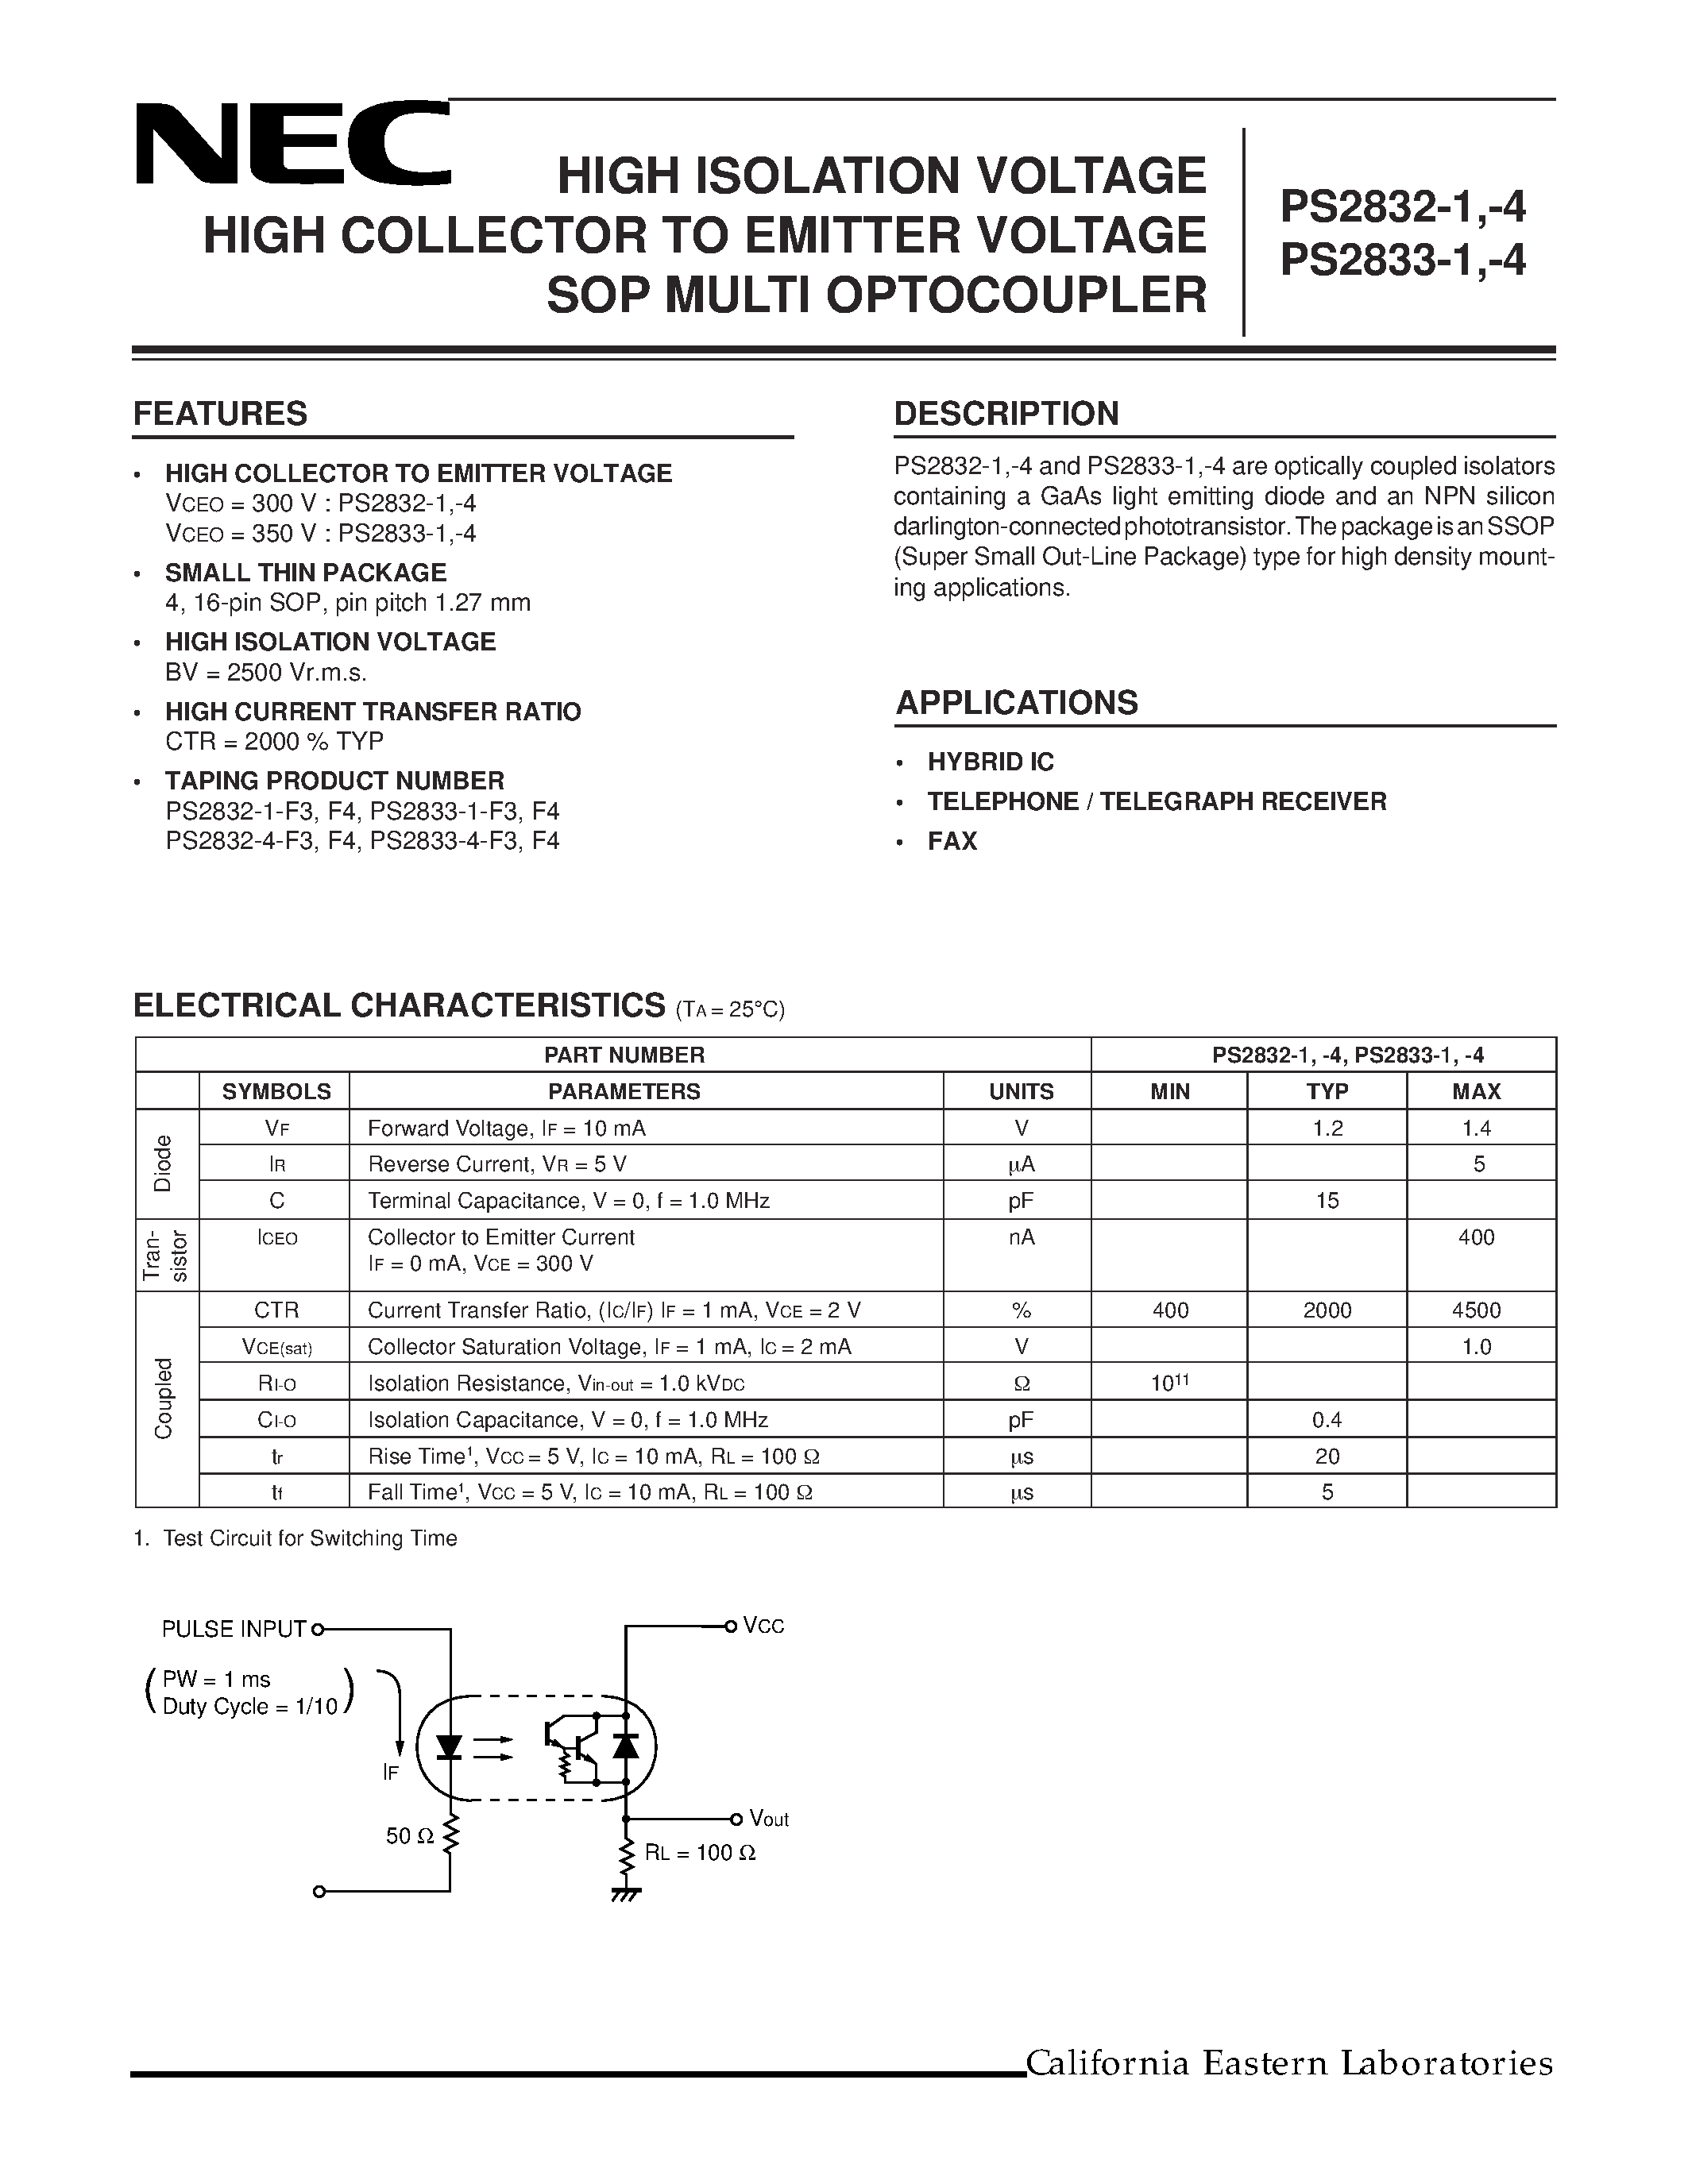 Datasheet PS2832-1-V-F3 - HIGH ISOLATION VOLTAGE HIGH COLLECTOR TO EMITTER VOLTAGE SOP MULTI OPTOCOUPLER page 1